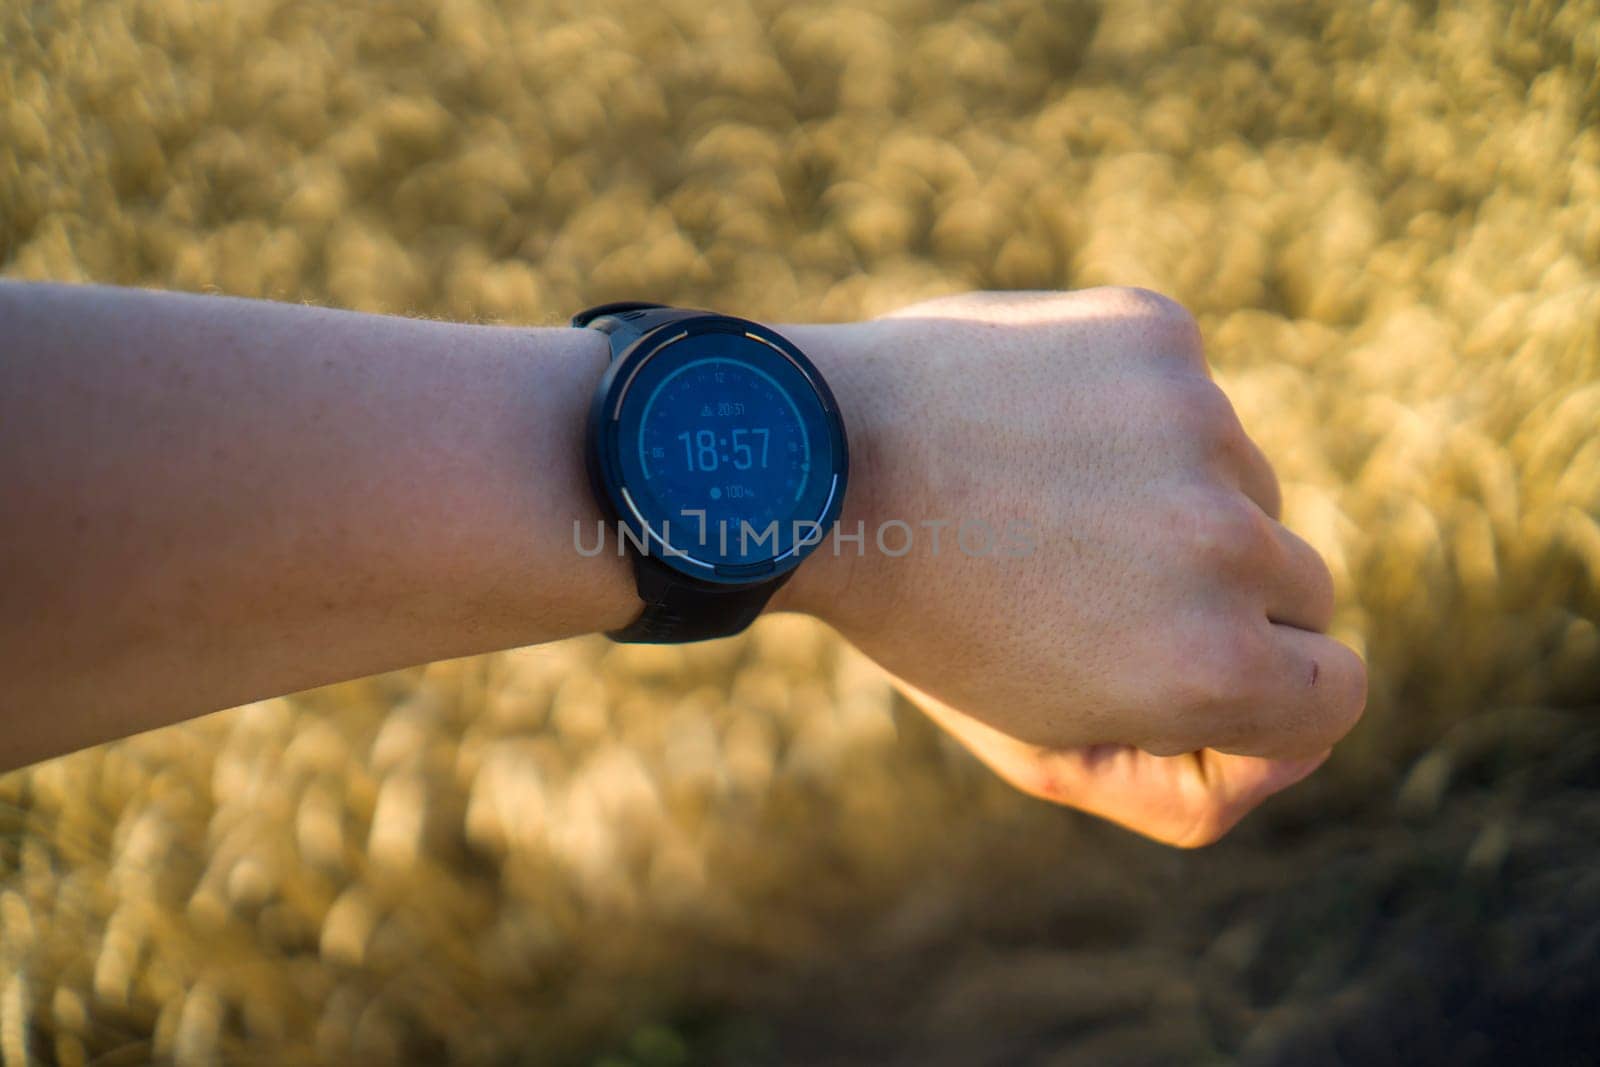 Men's hand with a smart waterproof functional watch showing running pace, heart rate monitor, barometer, built-in gps, heart rate monitor. A man is training outdoors with a modern device.